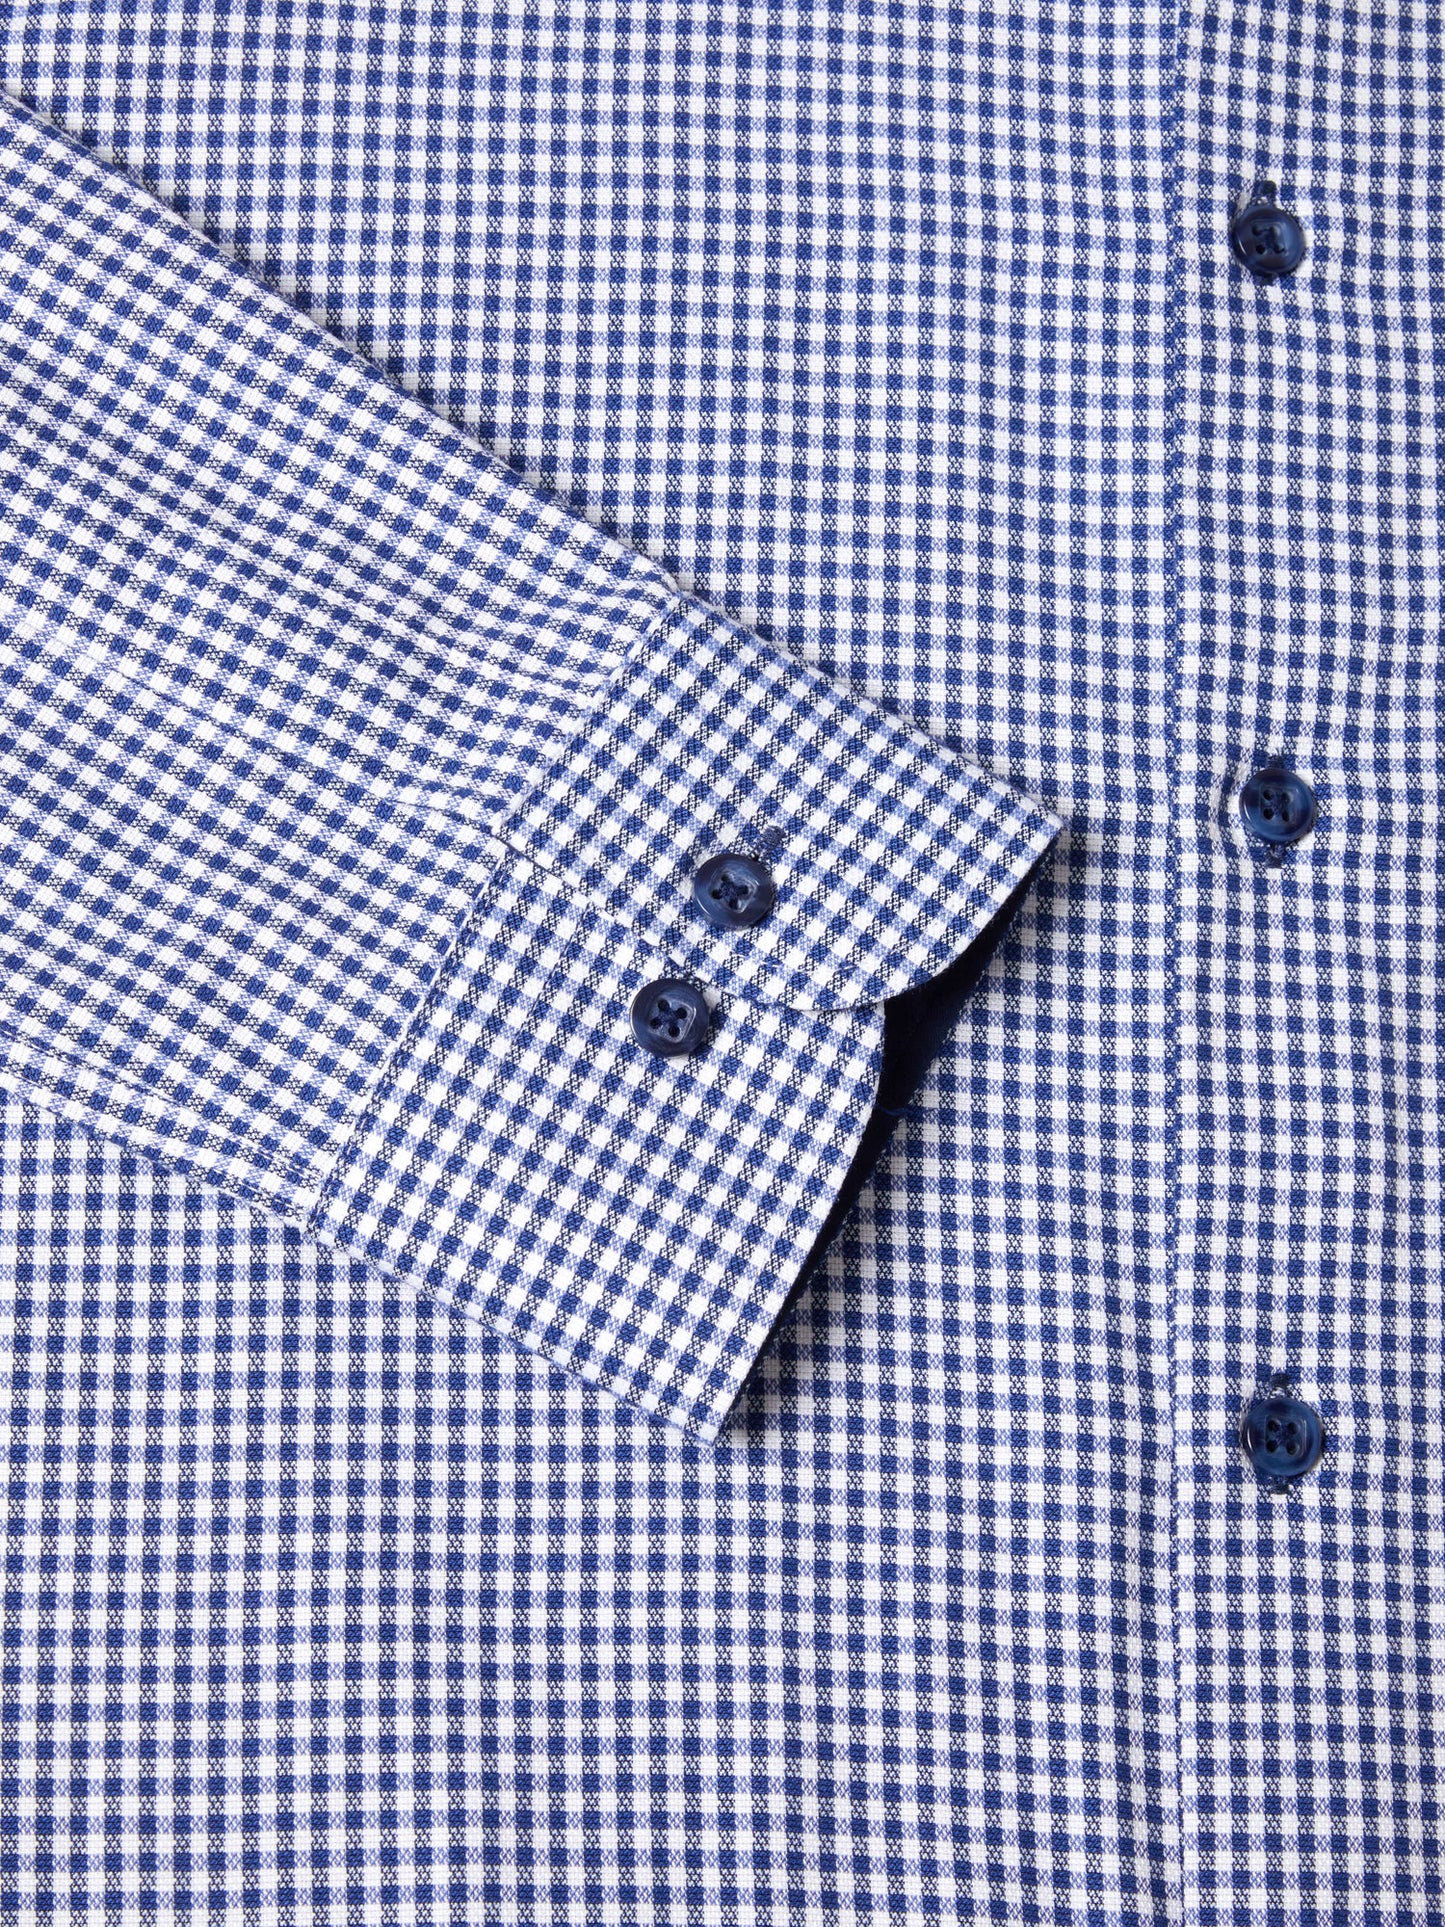 Brushed Cotton Button-Down Long-Sleeve Shirt - Blue Puppytooth Check